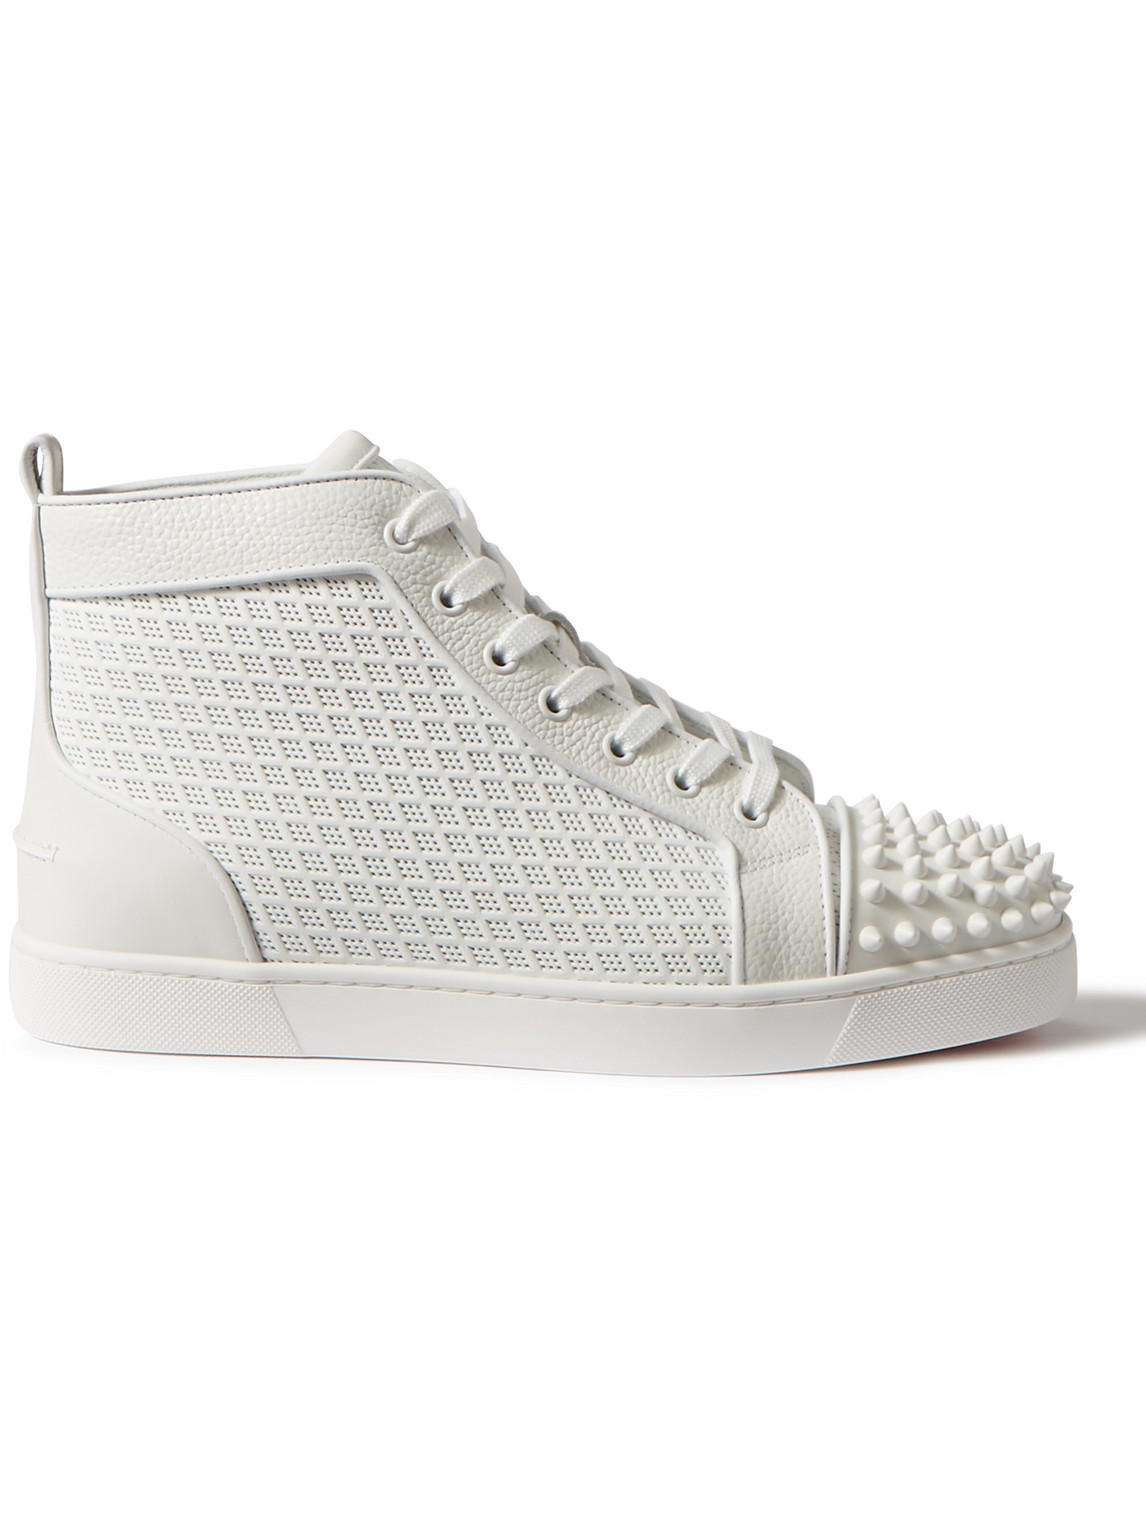 Christian Louboutin Lou Spikes Orlato Studded Leather And Mesh High-top Sneakers In White